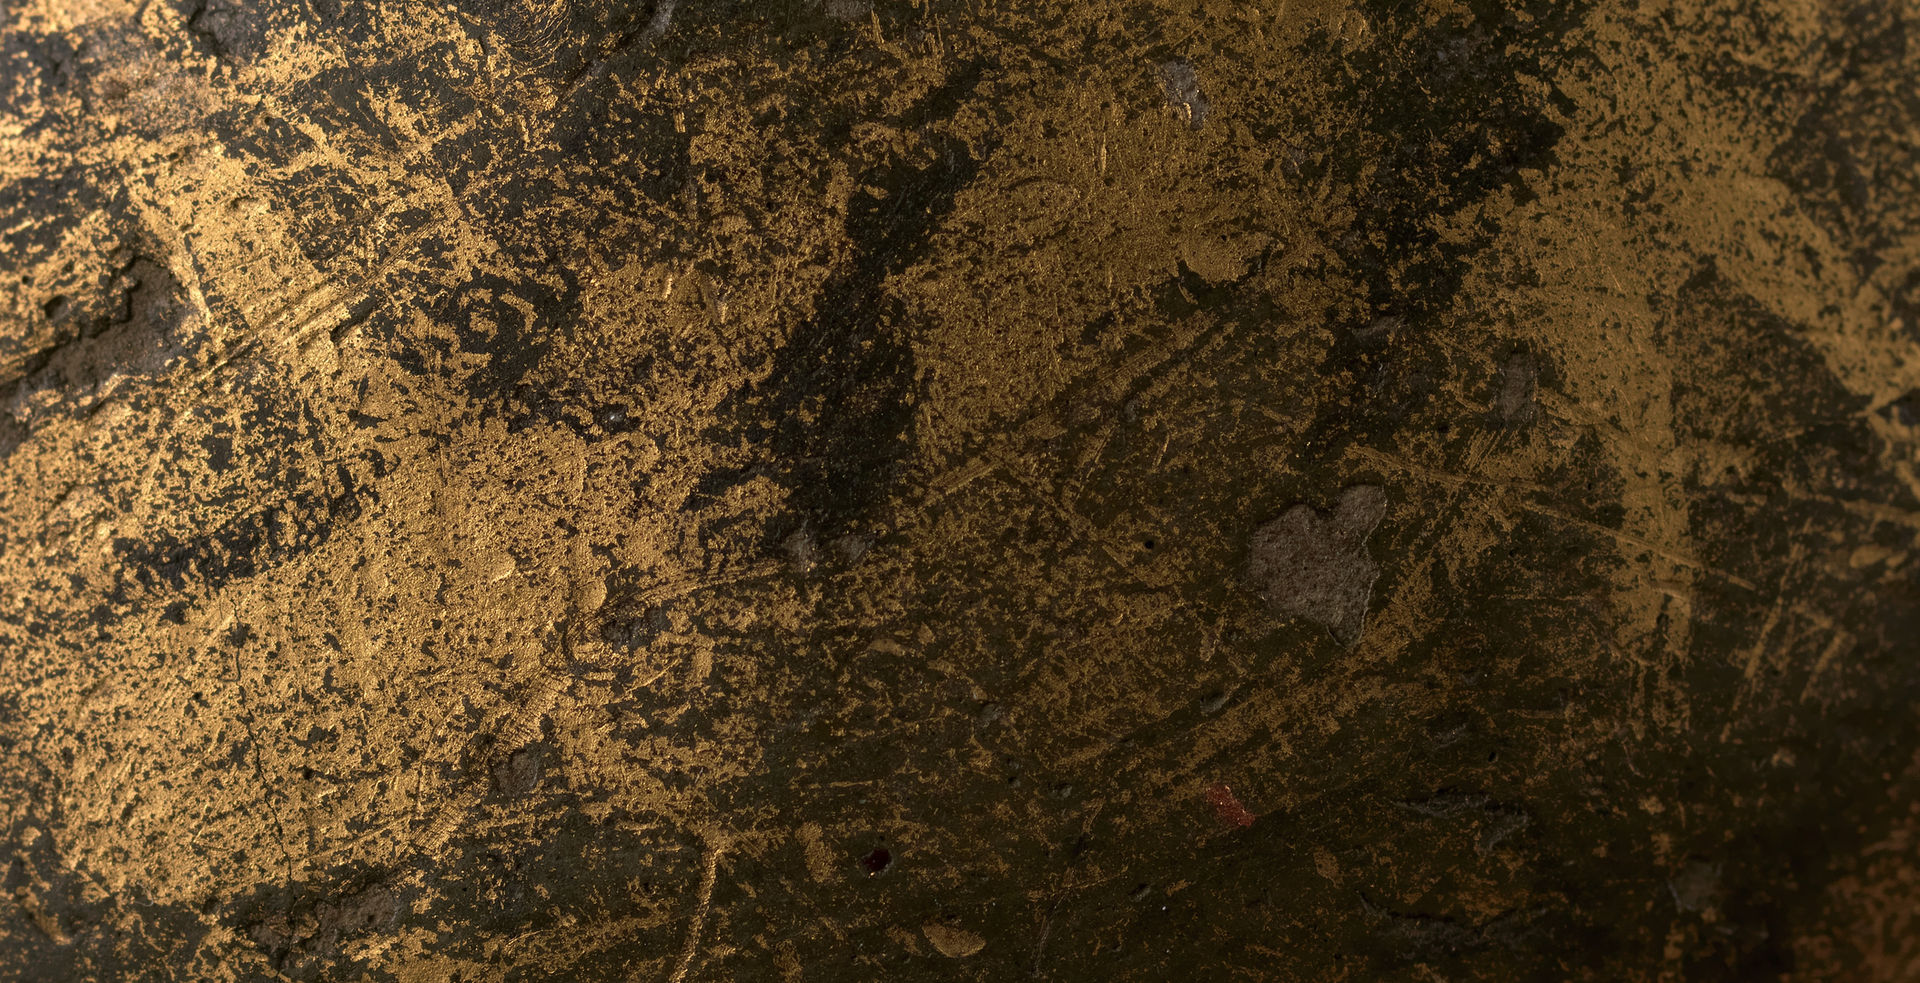 A metallic black and gold texture